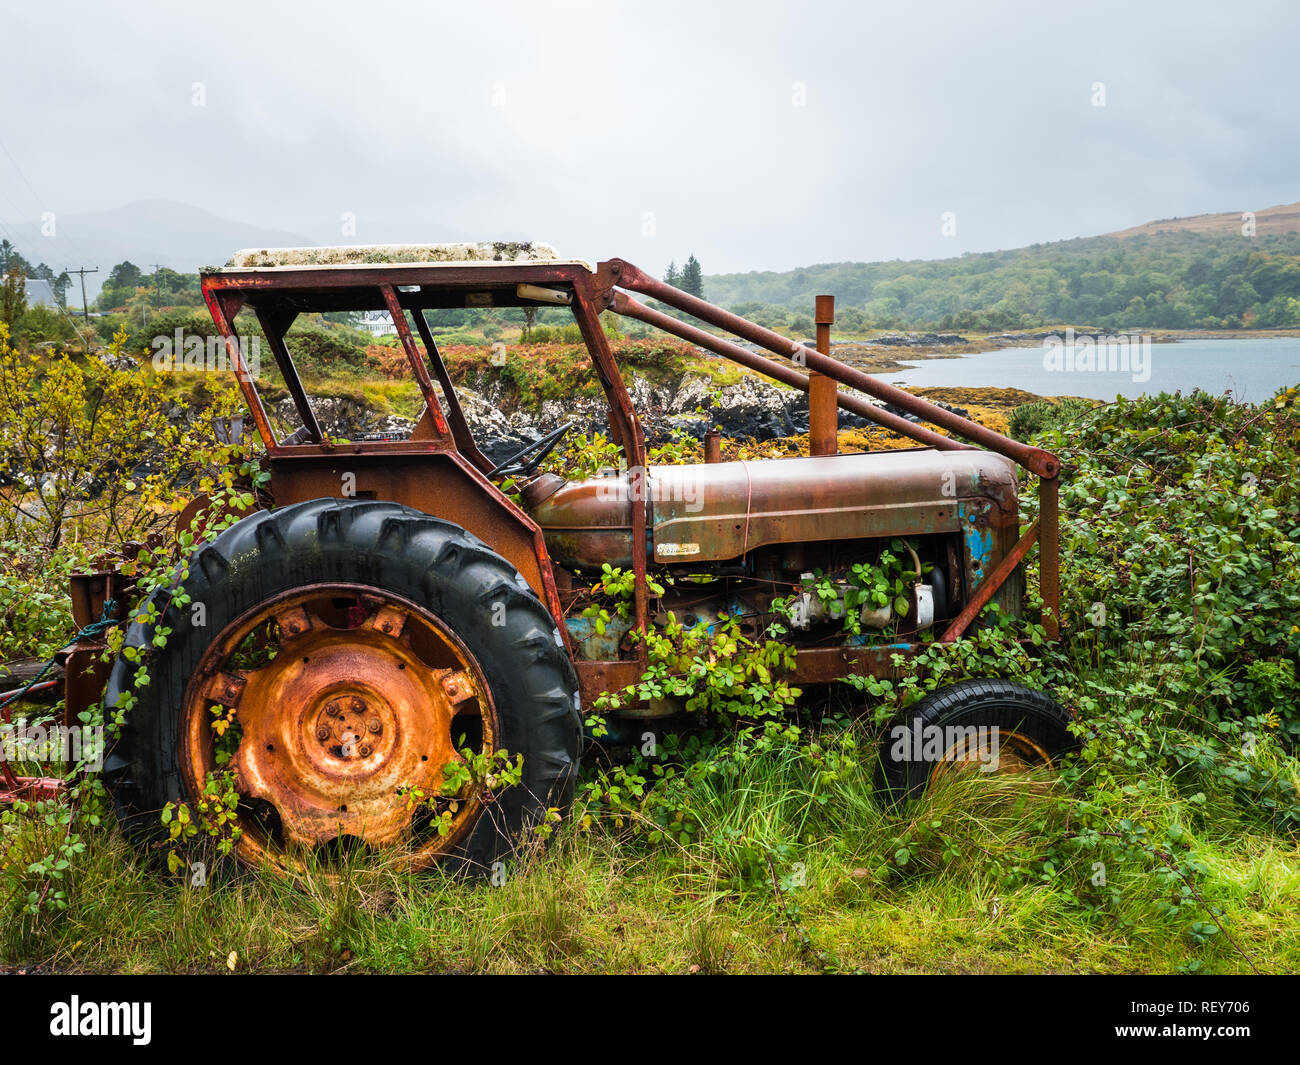 Old rusty tractor overgrown with weeds near a lake Stock Photo